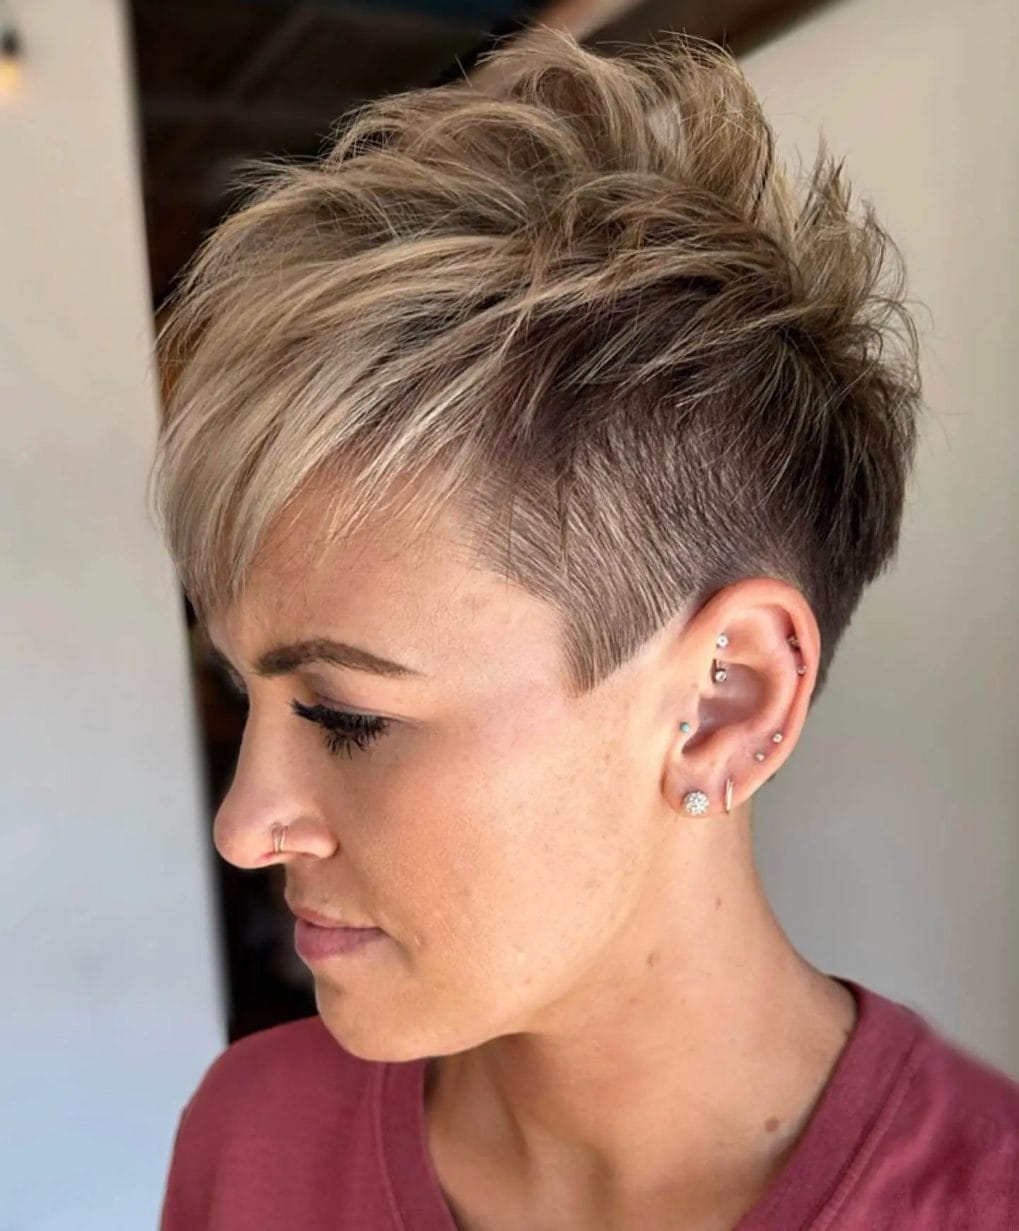 Honey-ash blonde pixie perfect for fine hair.